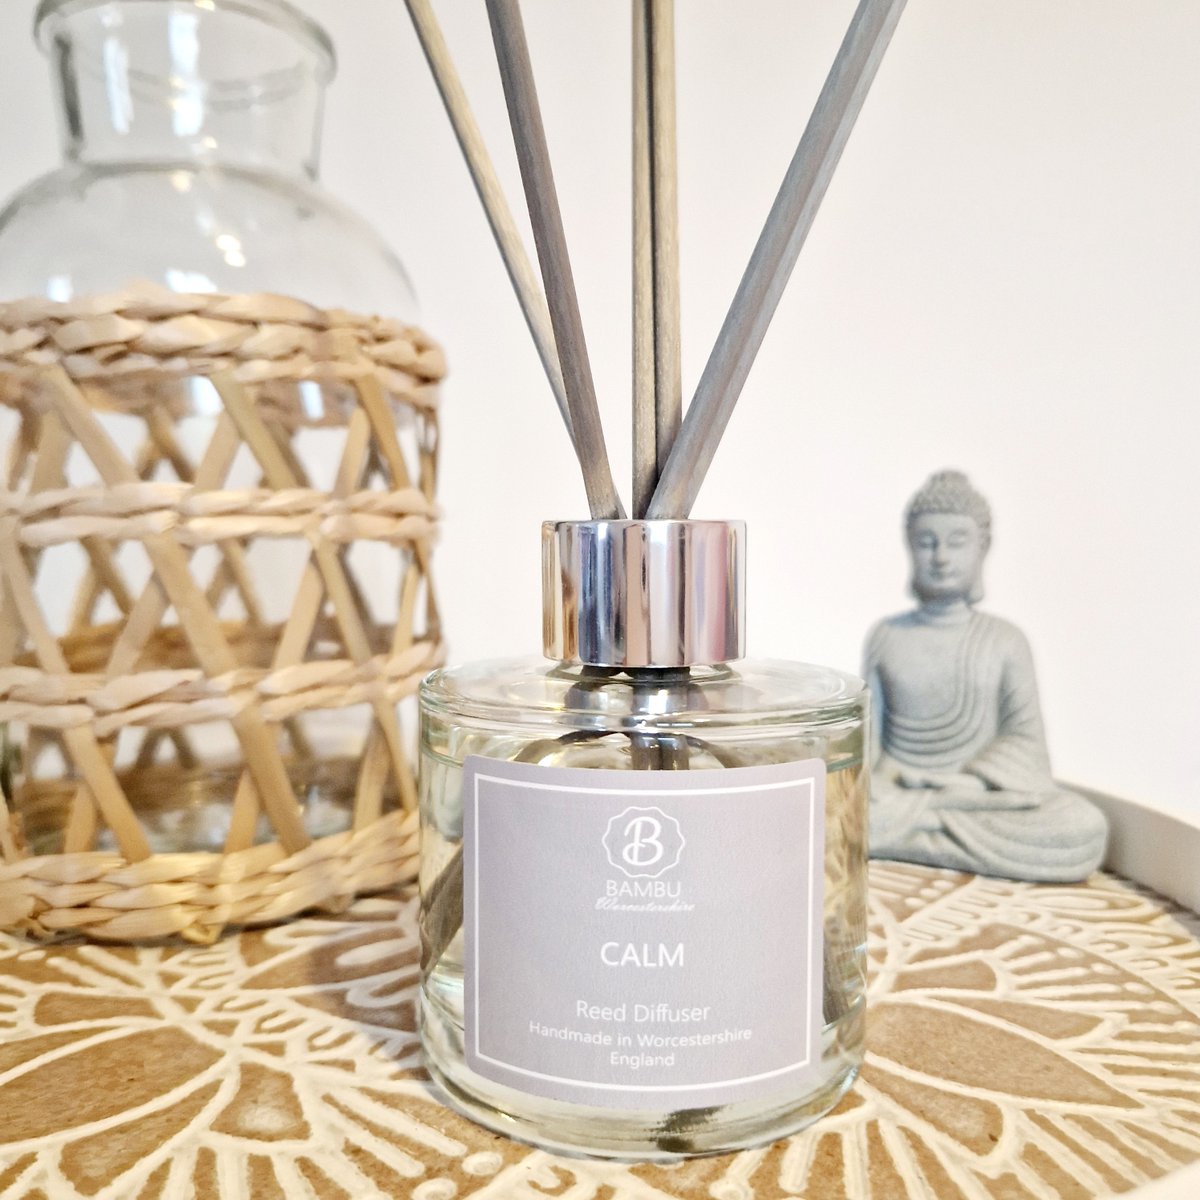 Calm Reed Diffuser - Calming & relaxing with notes of Lavender, eucalyptus, bergamot & vanilla on bambuworcestershire.co.uk/Calm-Reed-Diff… #calm #reeddiffuser #diffuser #homefragrance #spafragrance #worcestershirehour #ukgiftam #elevenseshour #CraftBizParty